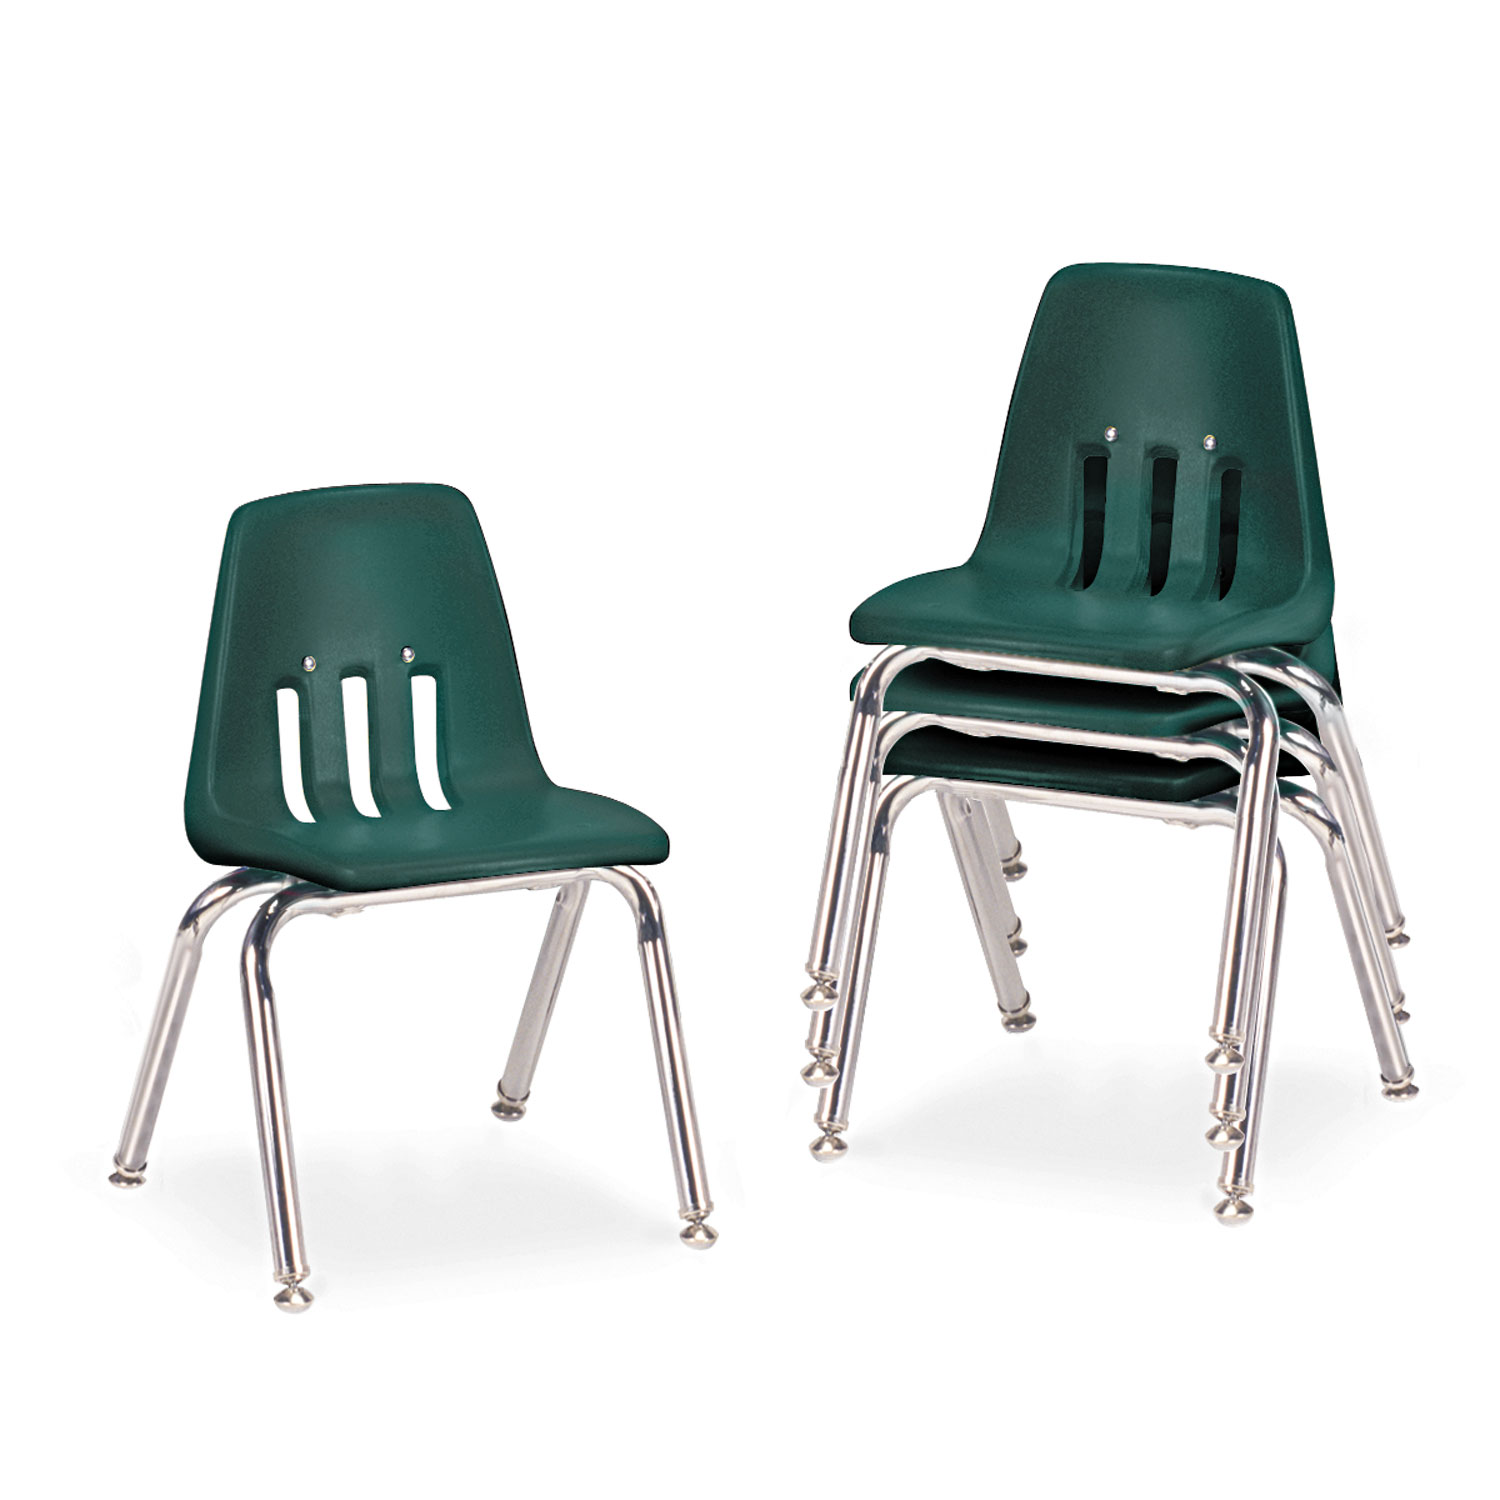 9000 Series Classroom Chairs, 14 Seat Height, Forest Green/Chrome, 4/Carton